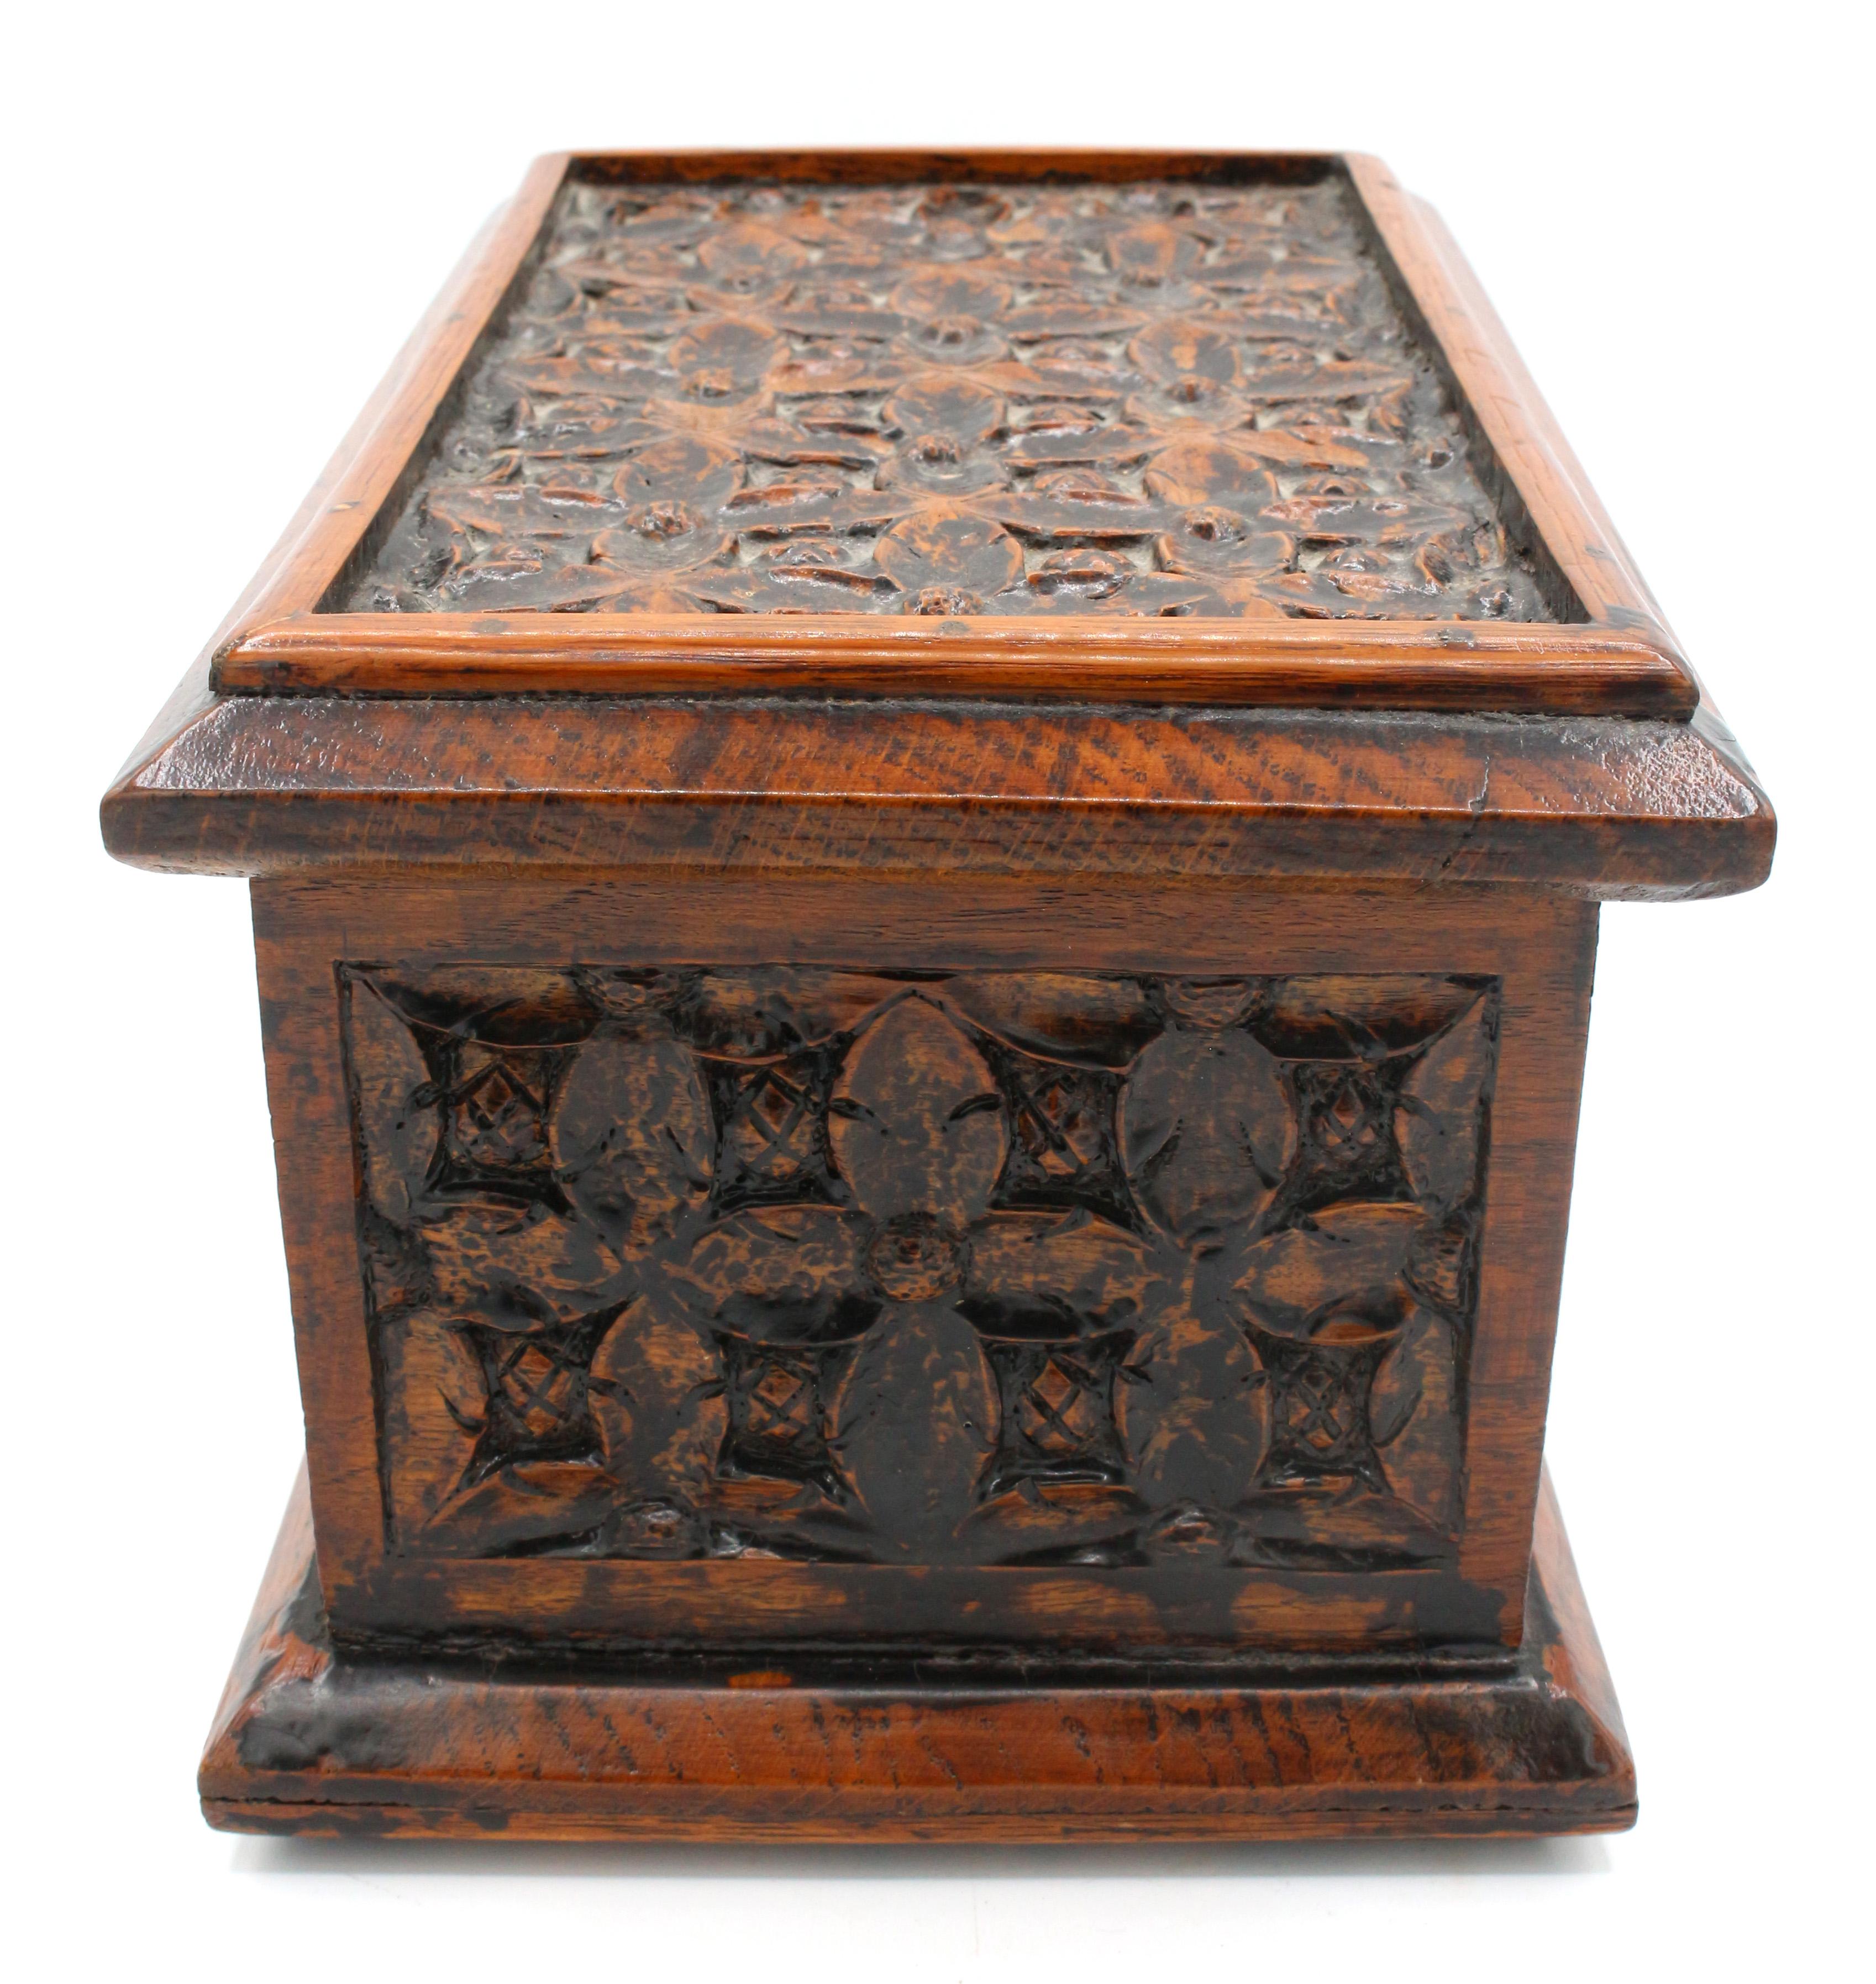 English Gothic Revival Document Box, c.1860-80. Carved oak with repetitive florets & bosses. Signed hinges: 